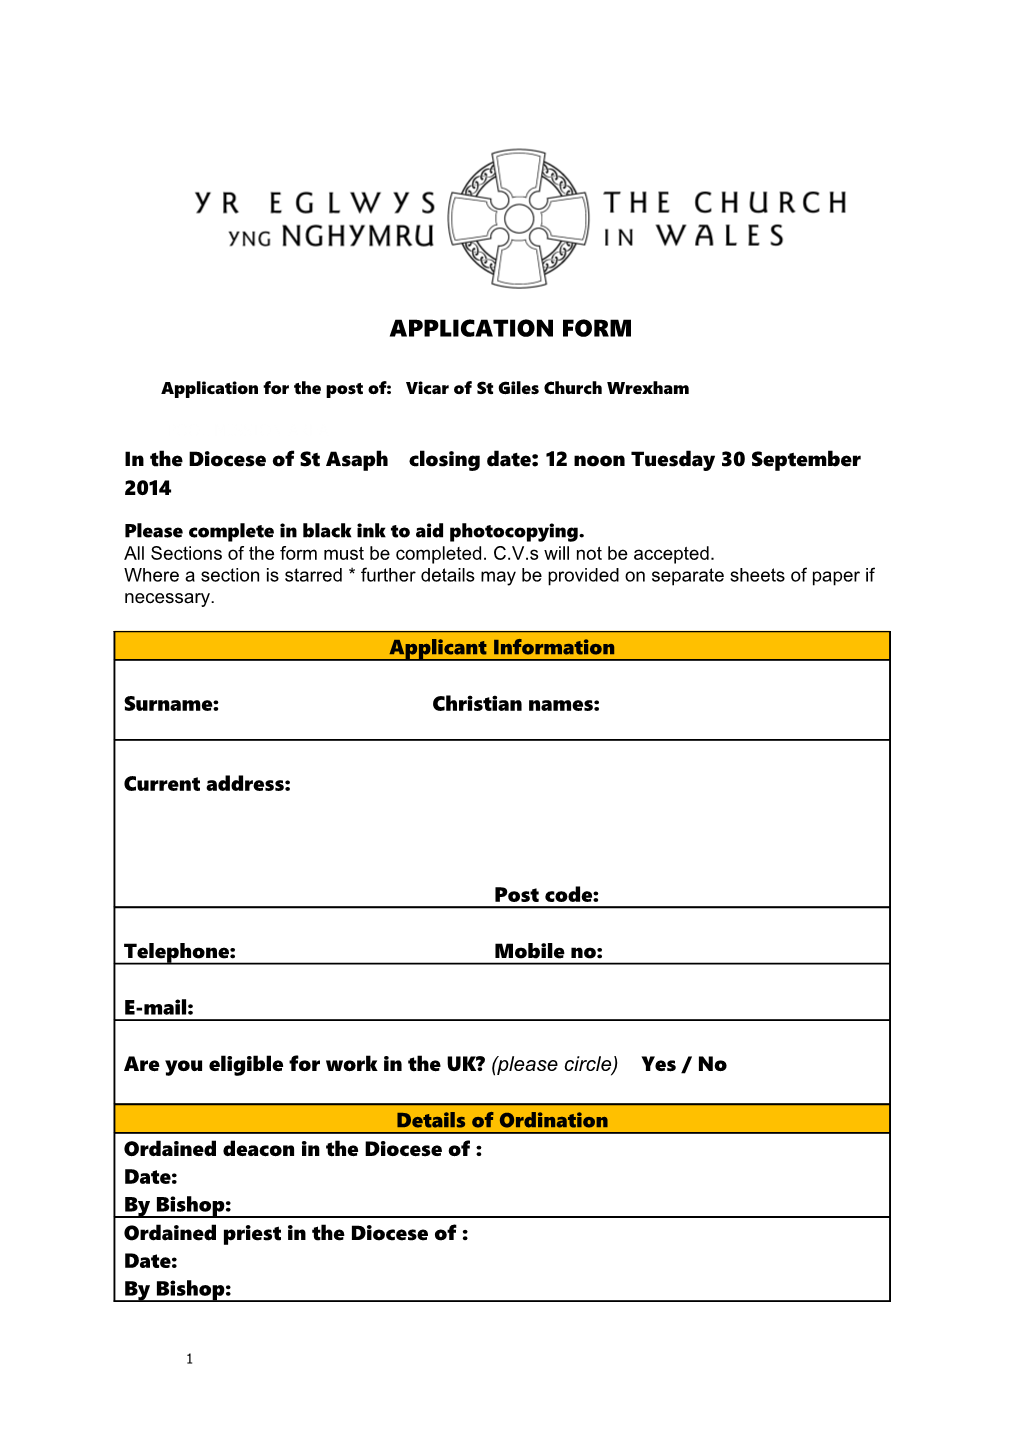 Application for the Post Of: Vicar of St Giles Church Wrexham